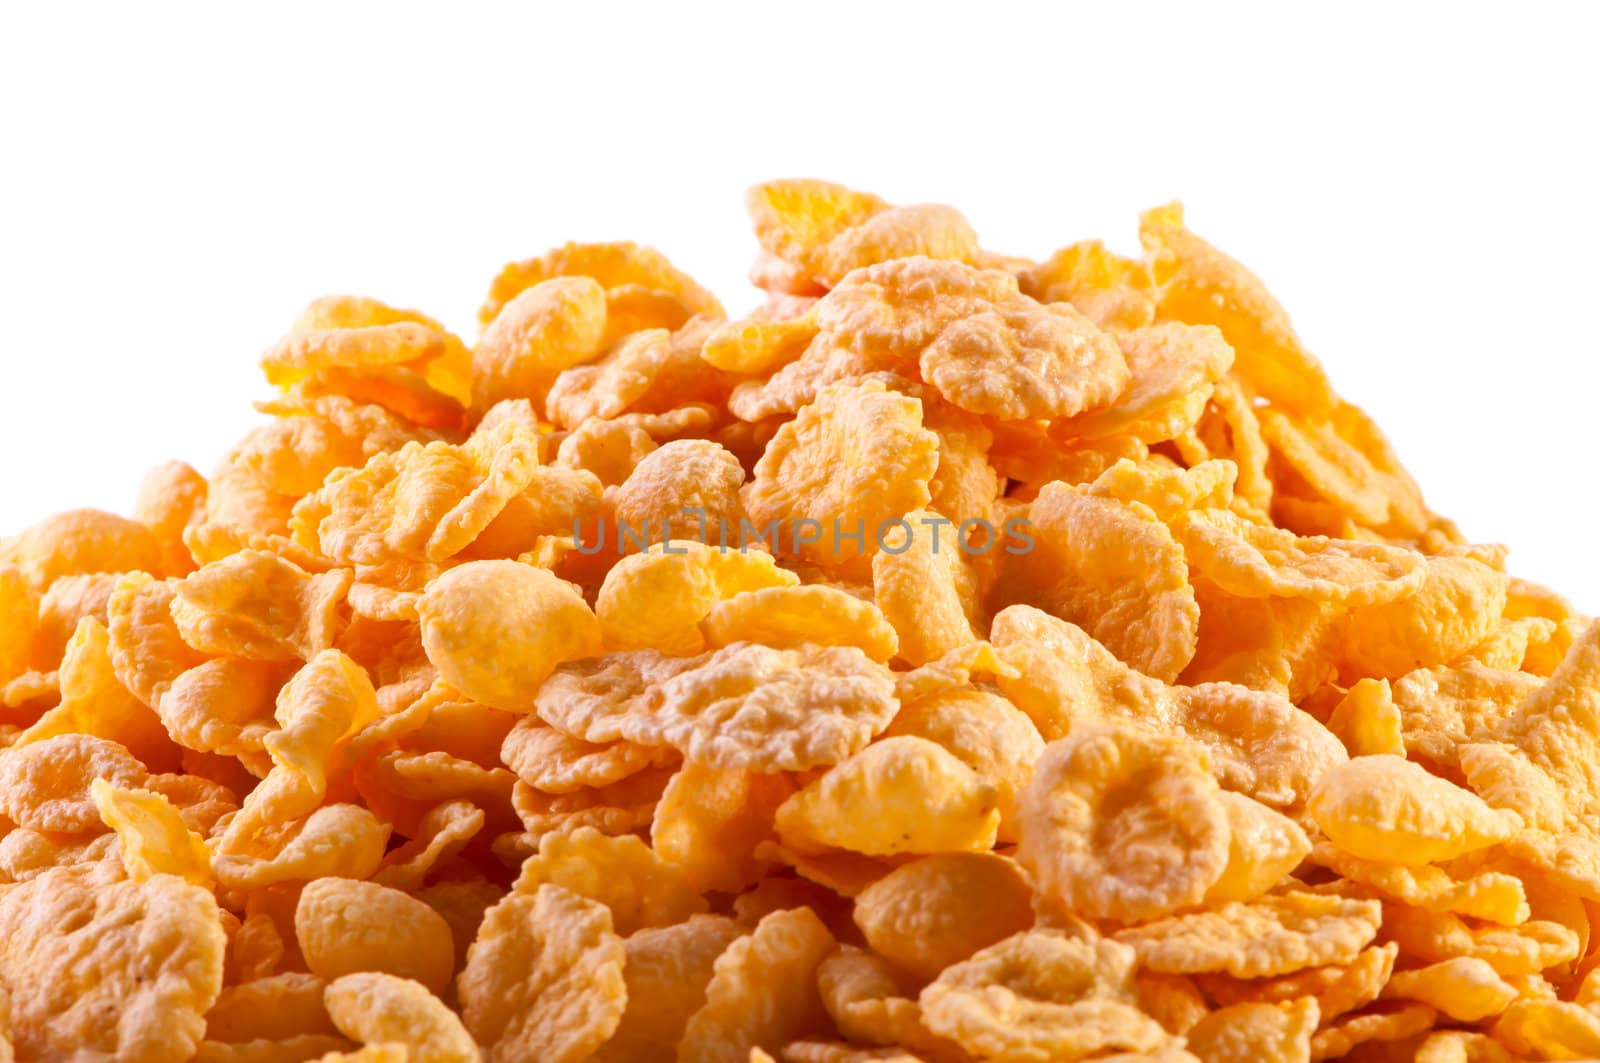 Goldish corn flakes by rook